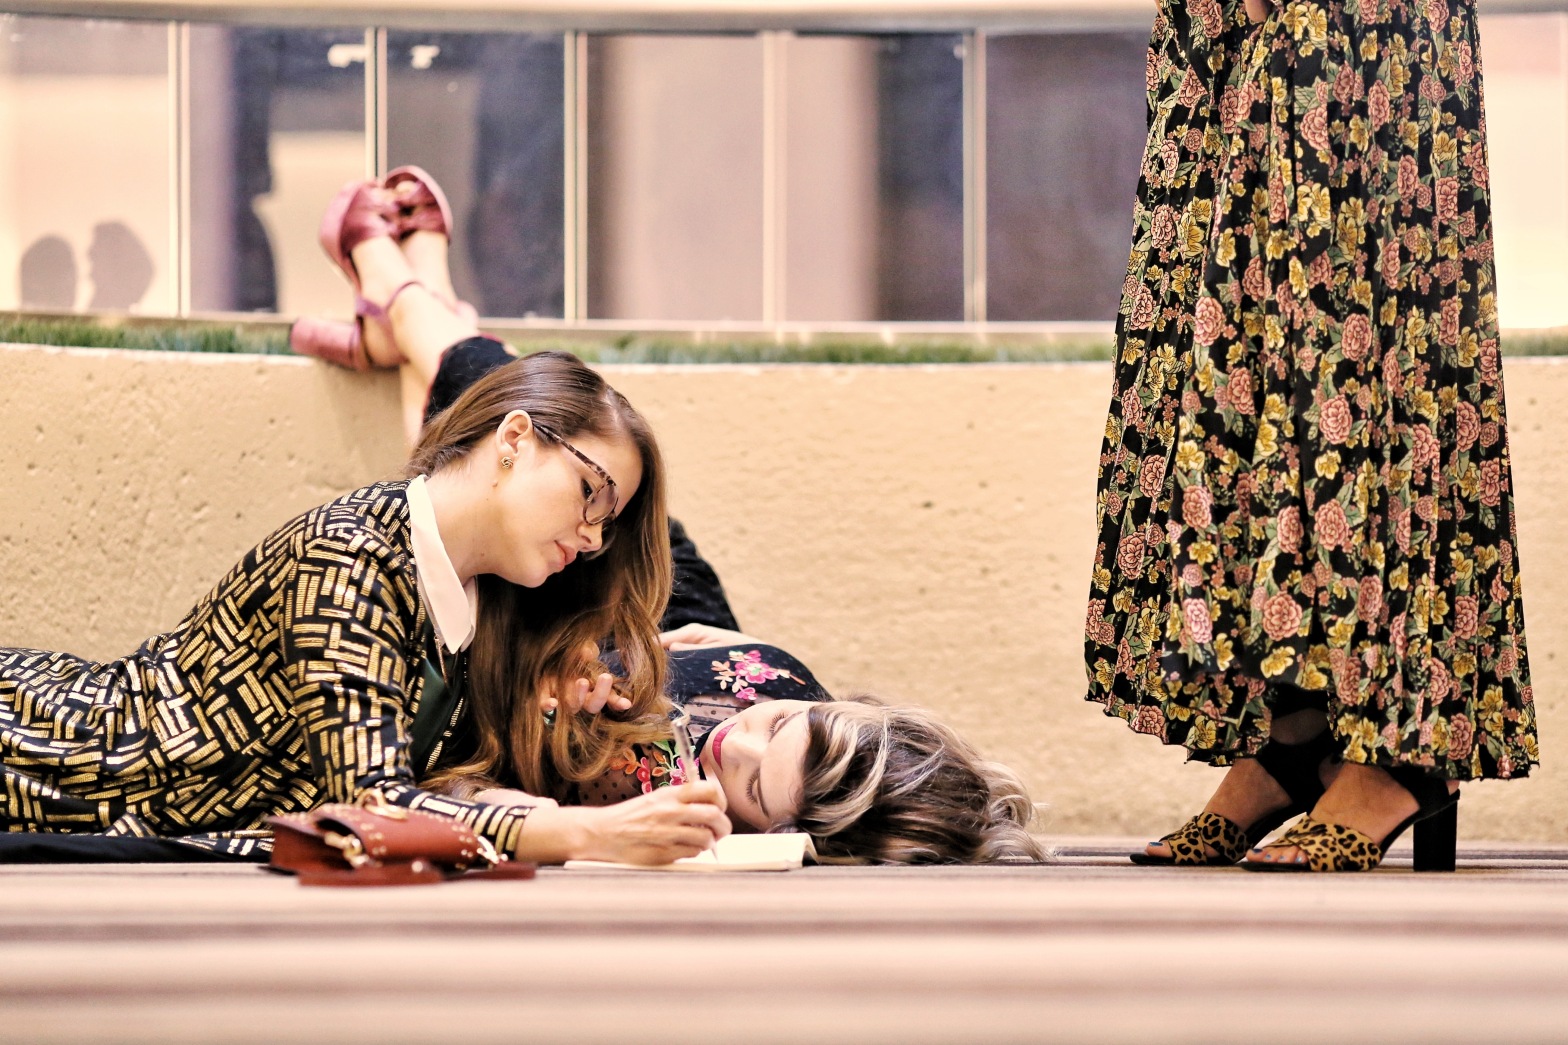 Katie Dunlavy, Lularoe boutique owner, of The Pearl Pages in a patterned dress lying on the ground next to her daughter and writing in a notebook.